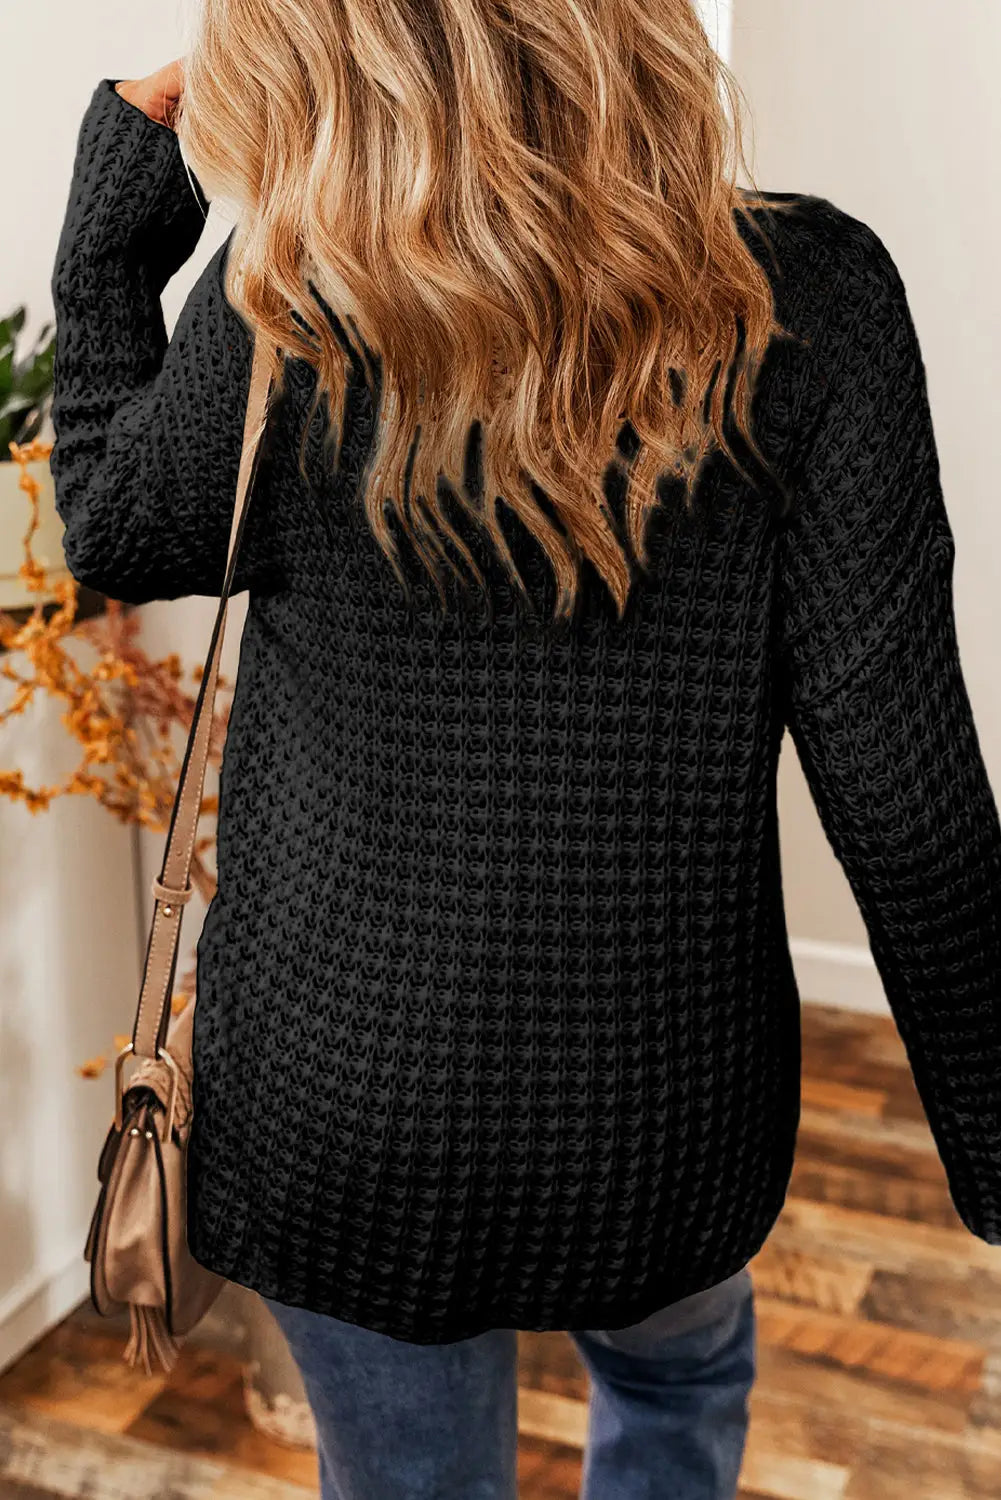 Black hollow-out crochet v neck sweater - sweaters & cardigans